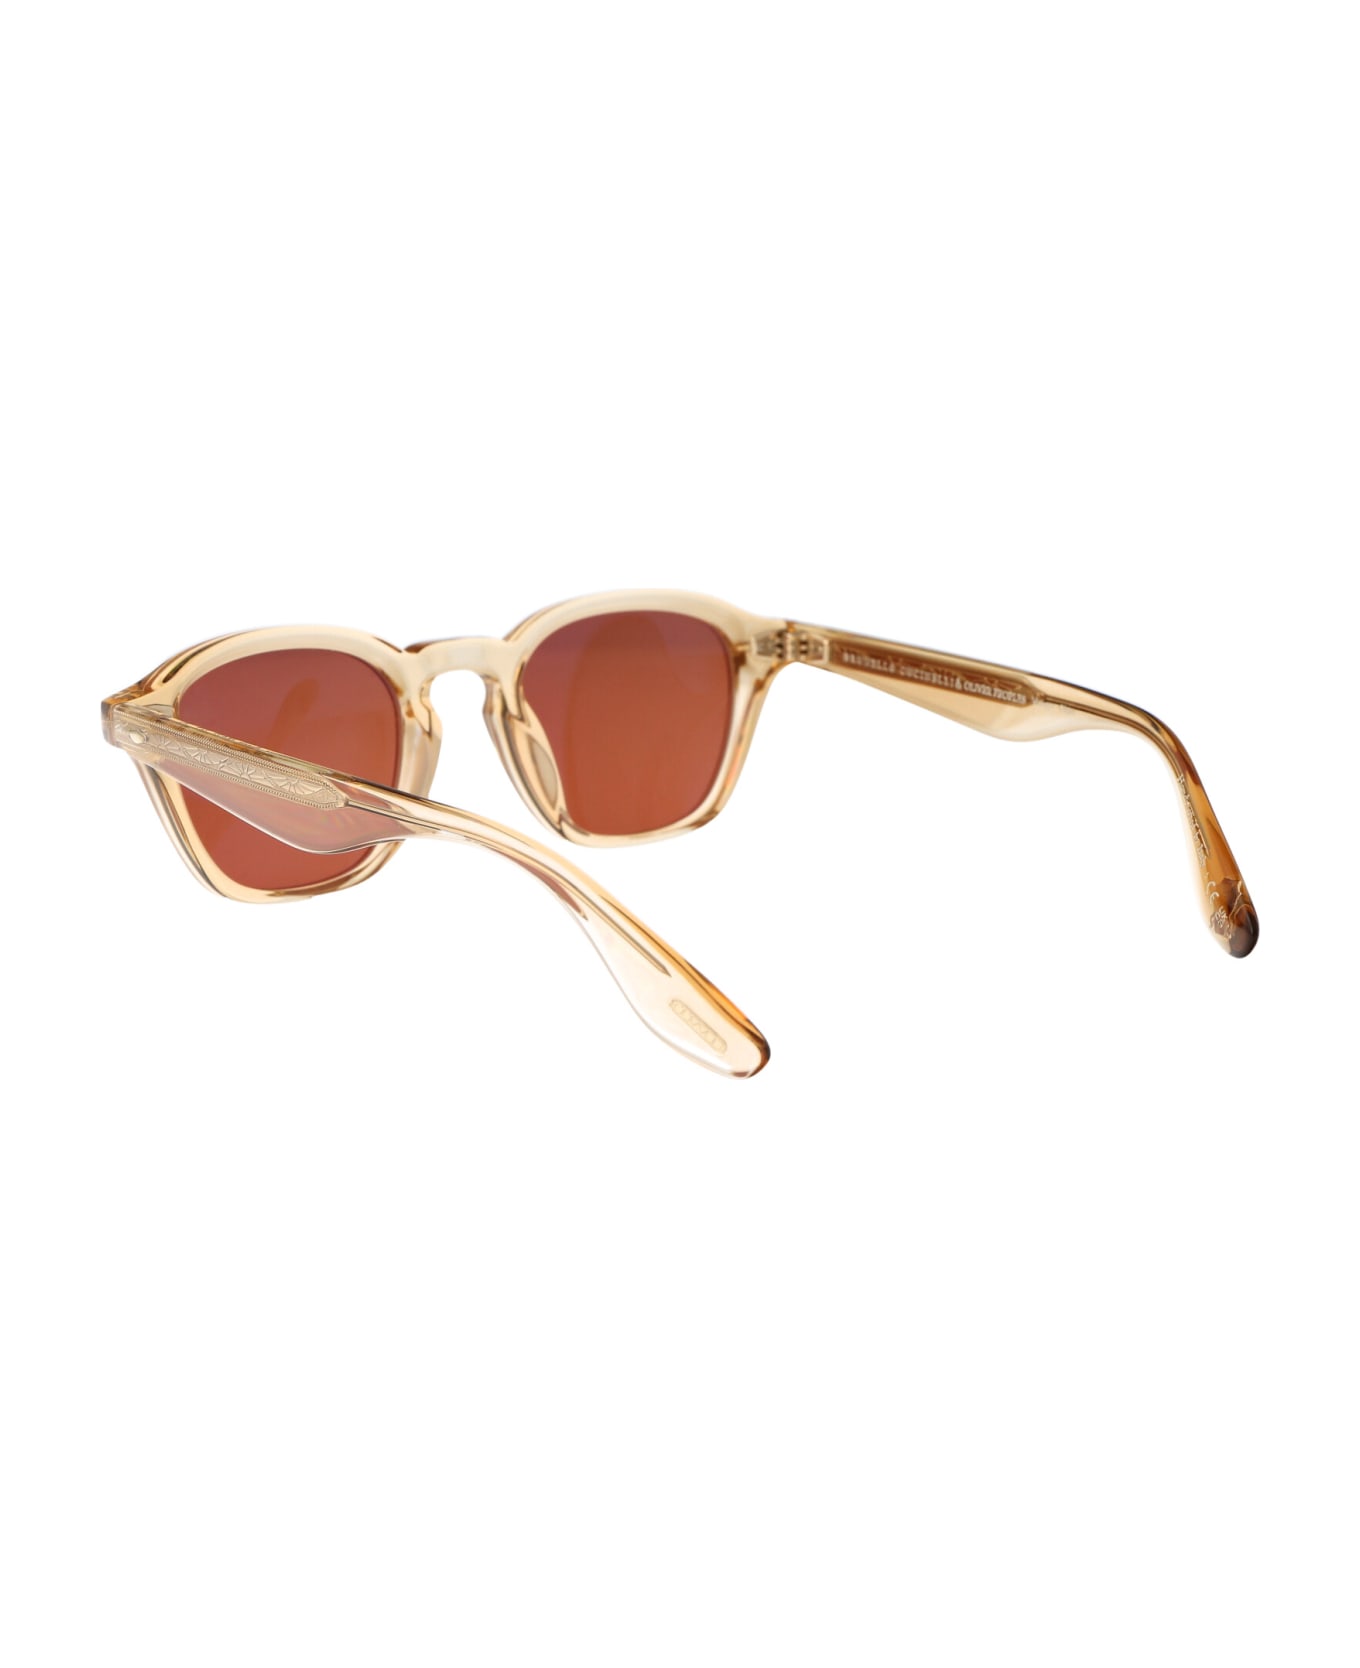 Oliver Peoples Peppe Sunglasses - 176653 Champagne サングラス